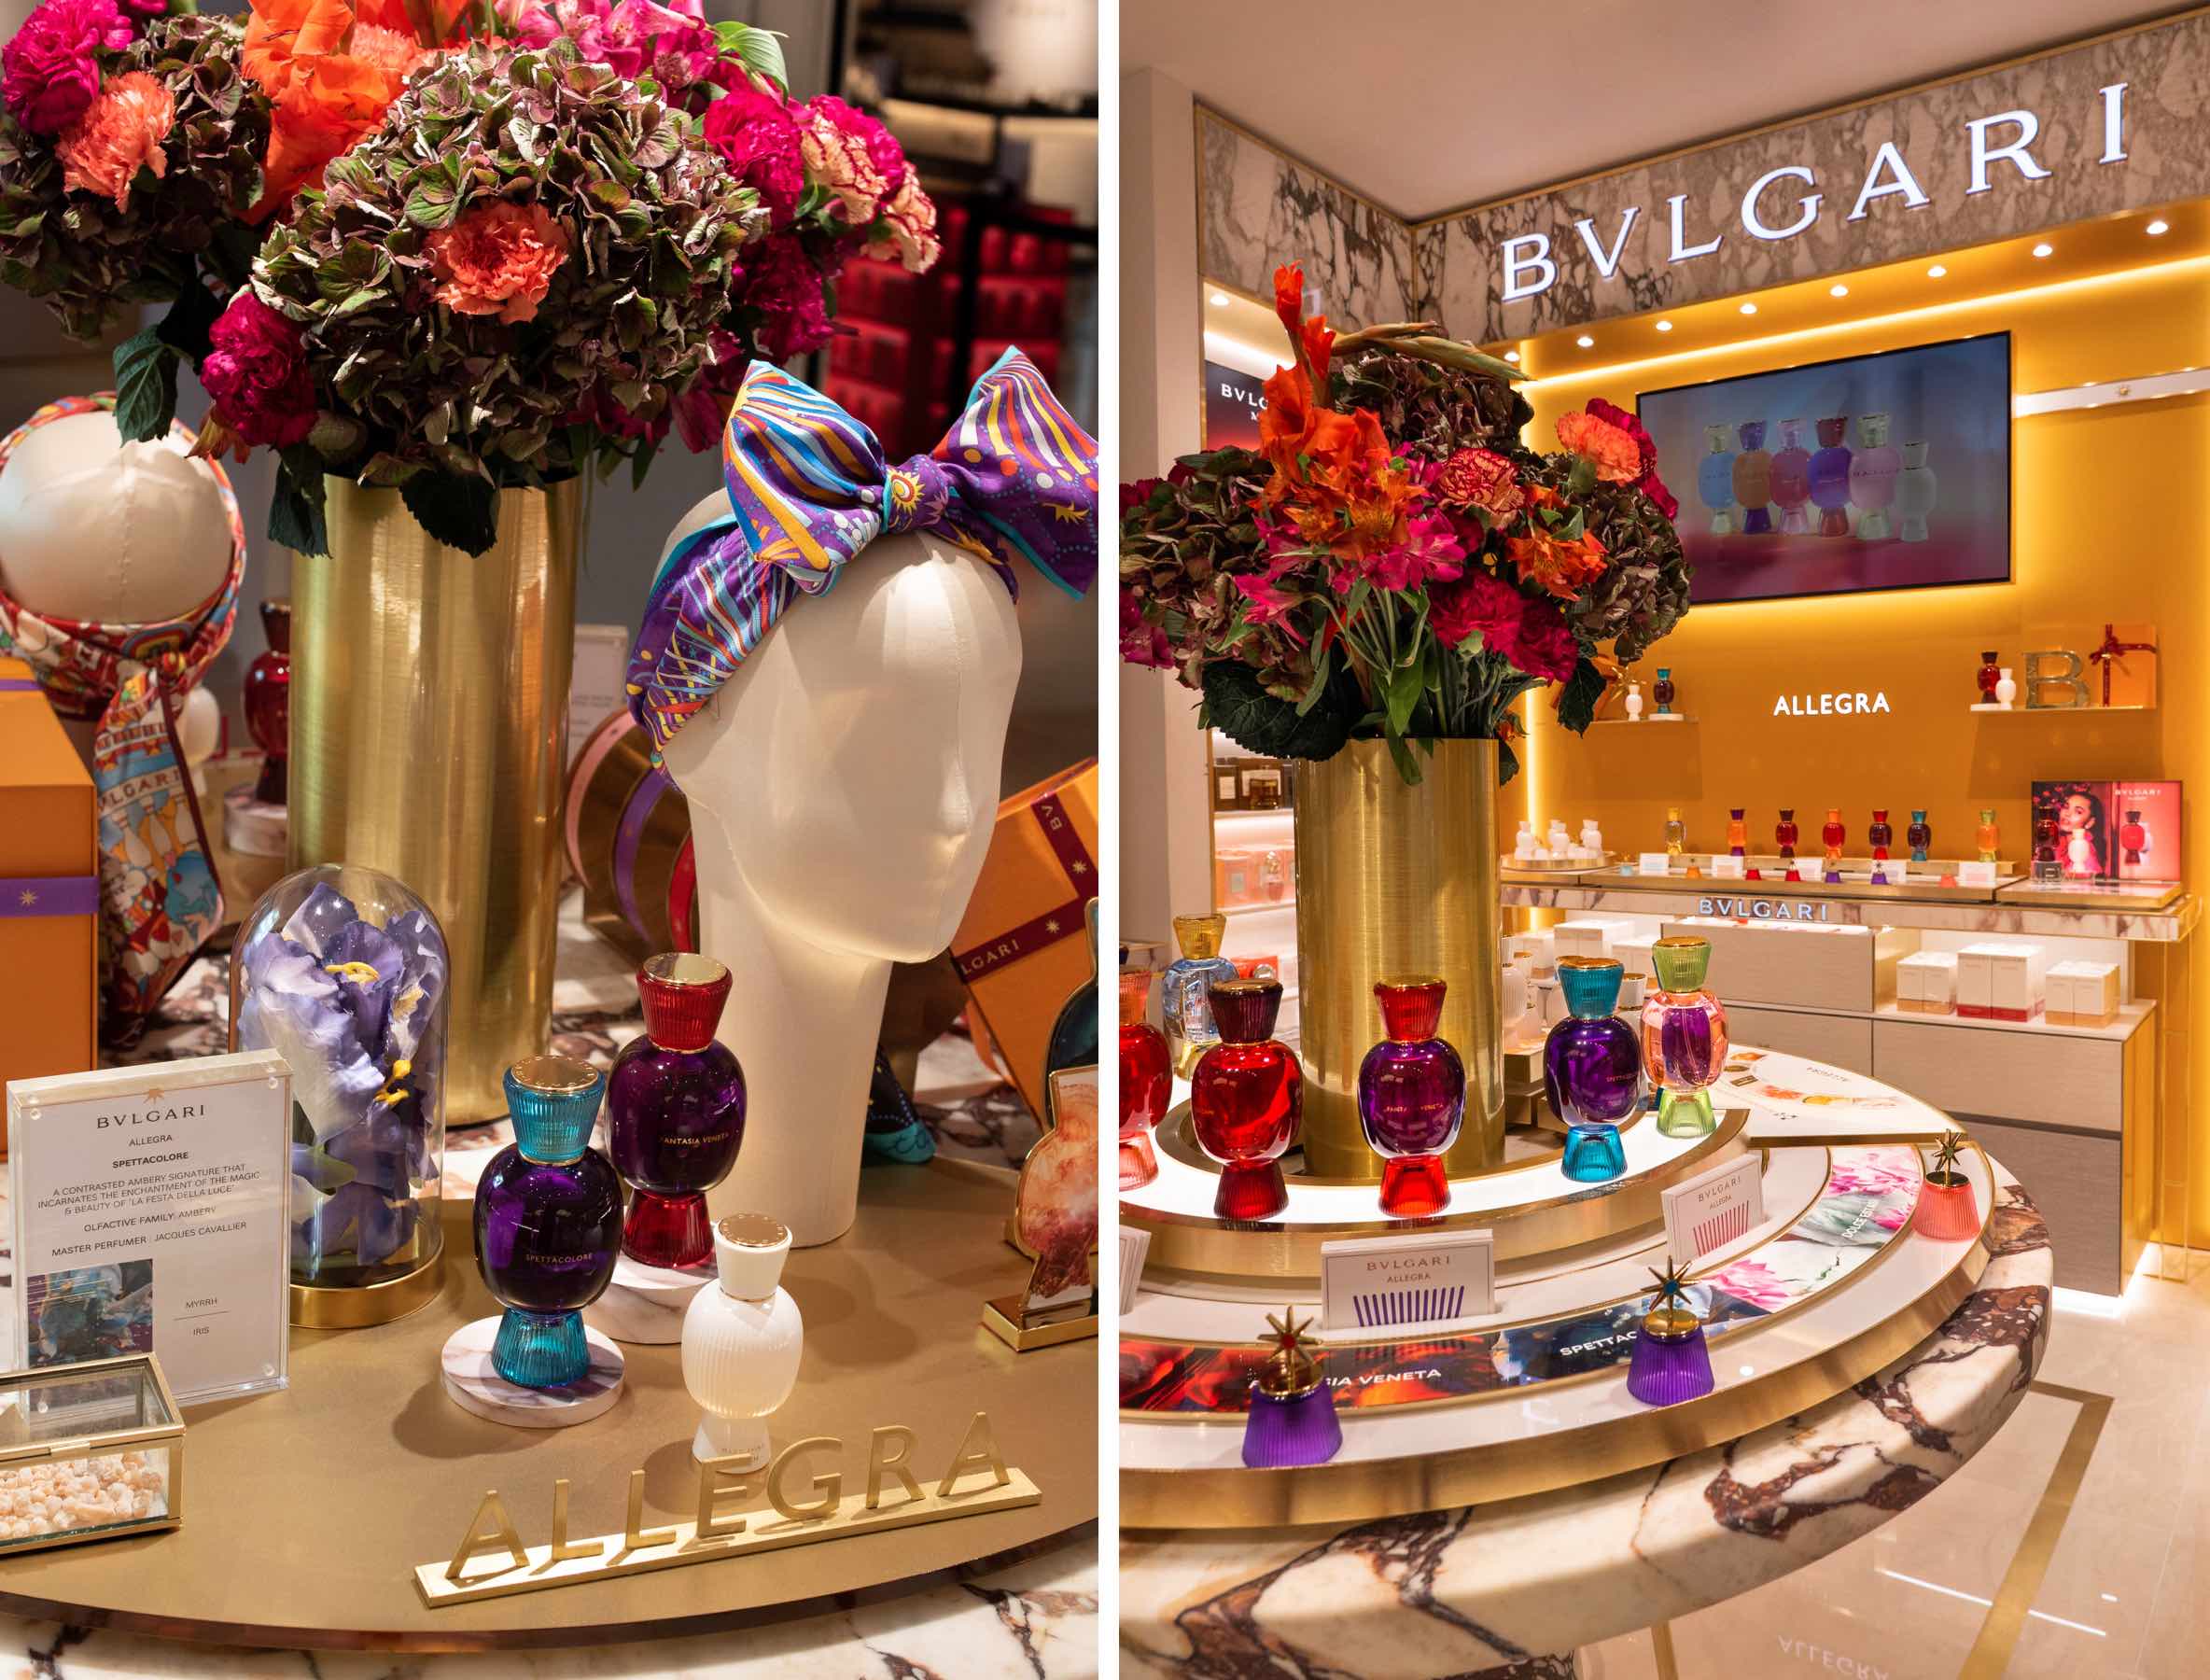 DFS unveils exclusive launch of Bulgari jewellery collection